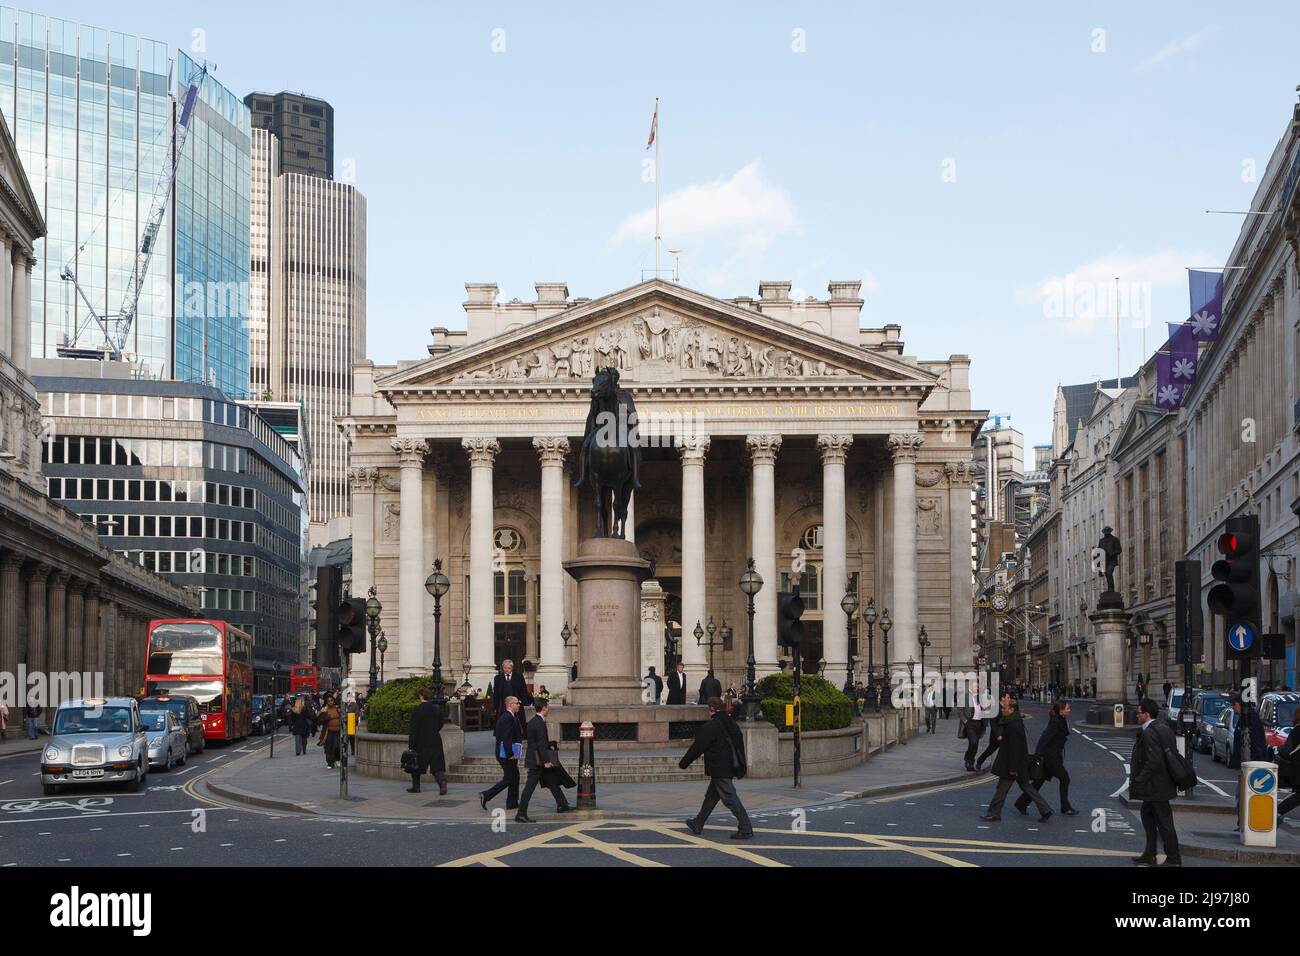 A view looking towards Royal Exchange building with the Bank of England on the left.  Bank of England is the central bank of the United Kingdom. Somet Stock Photo